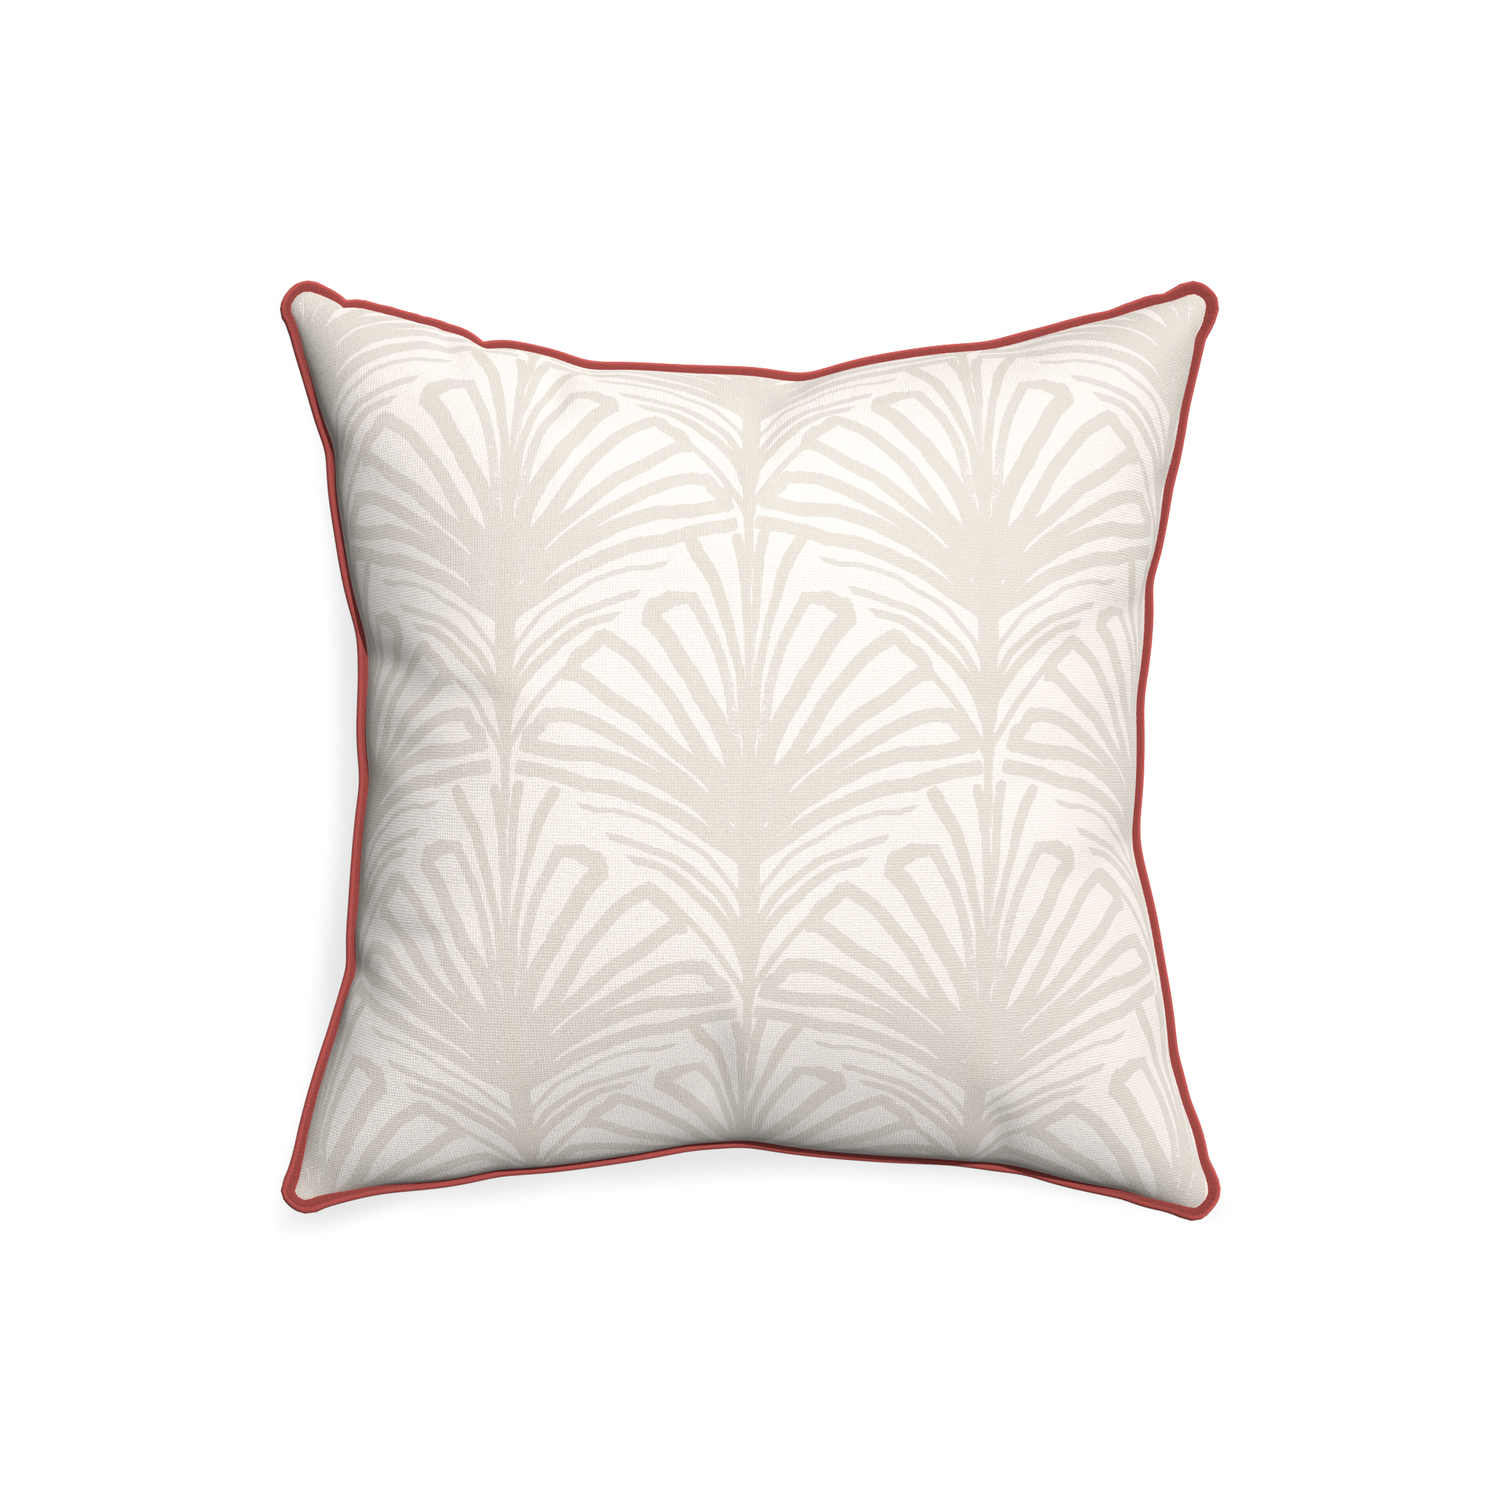 20-square suzy sand custom pillow with c piping on white background